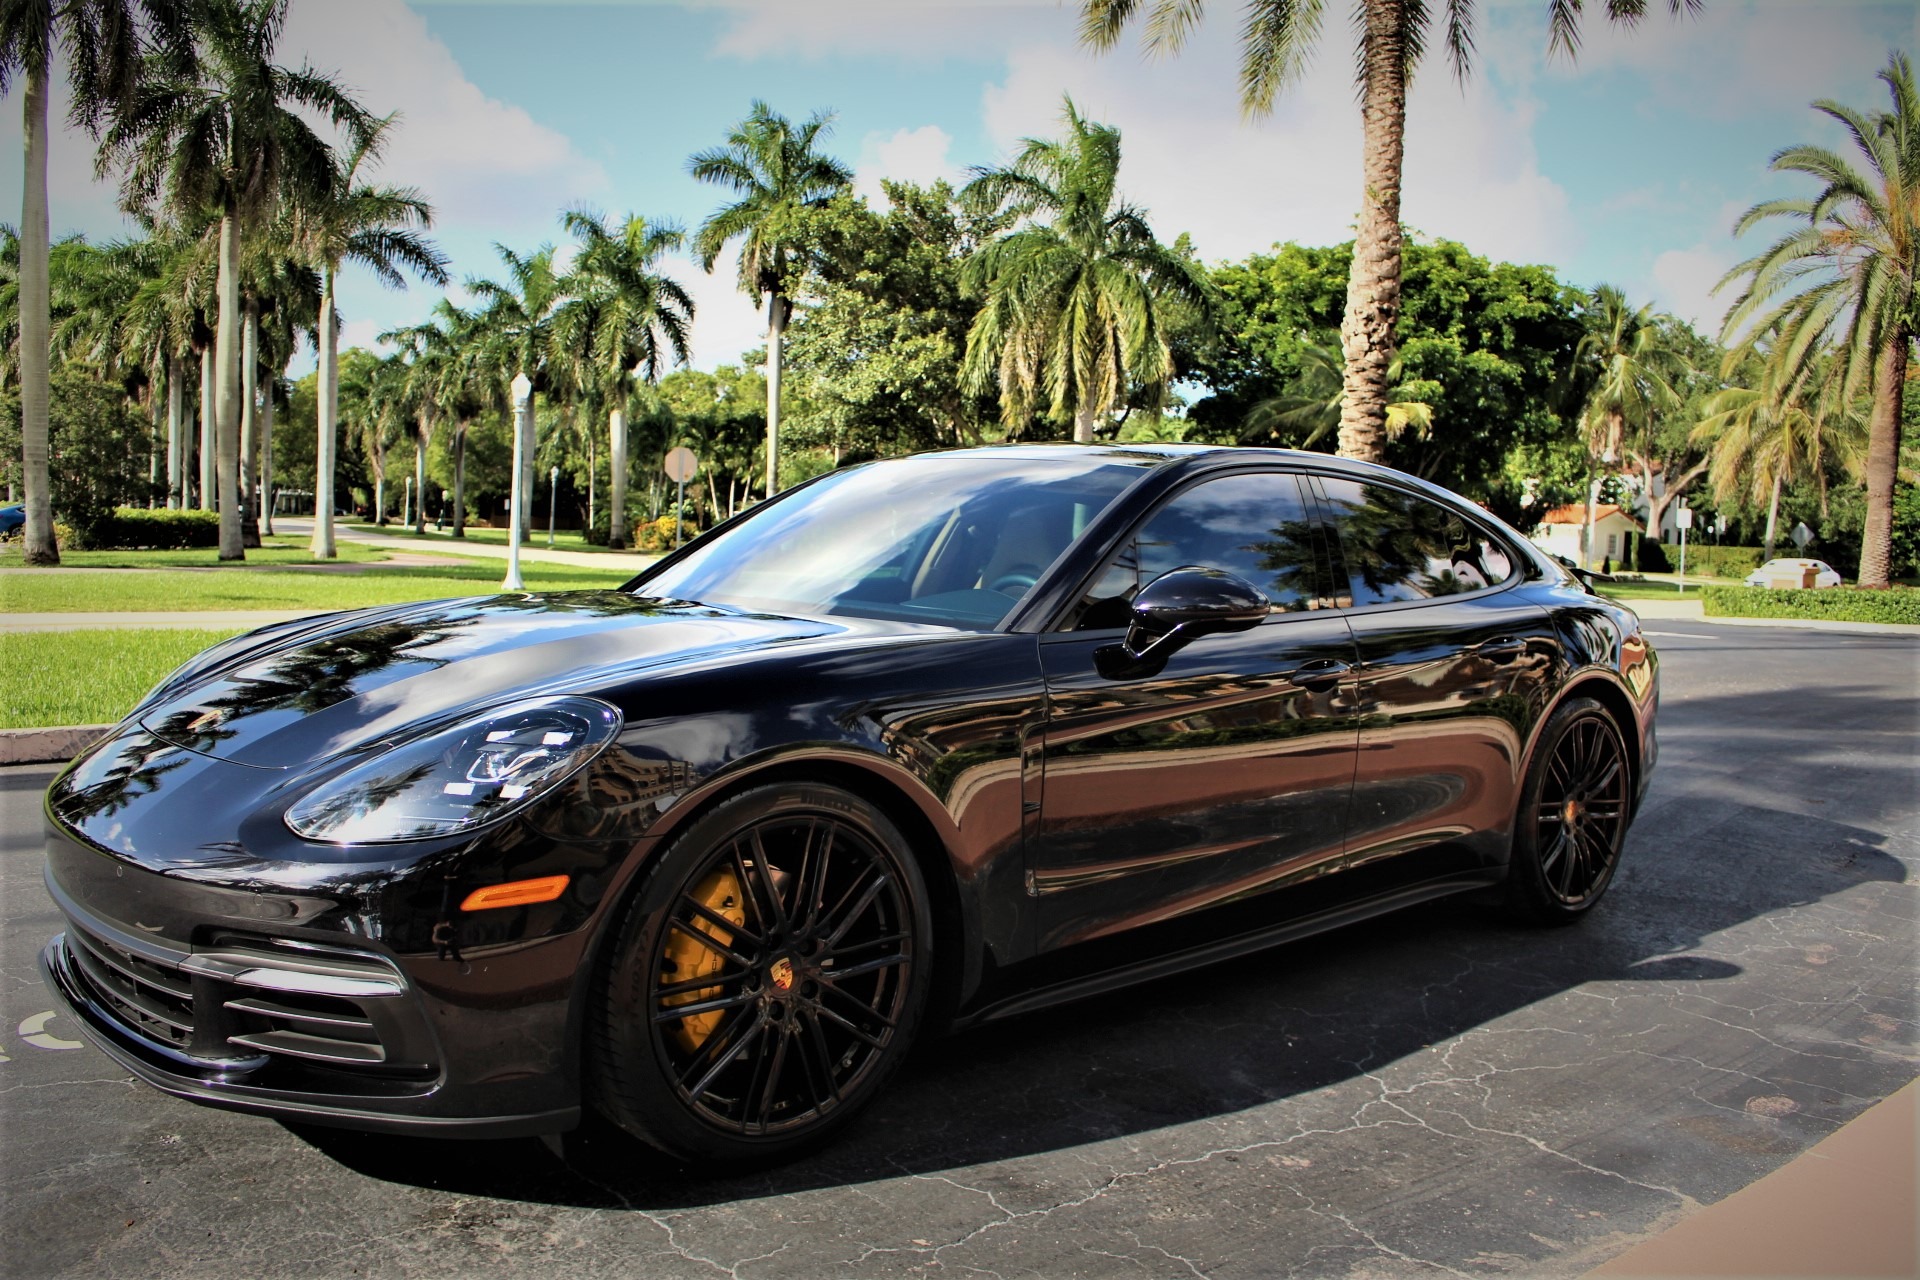 Used 2017 Porsche Panamera for sale Sold at The Gables Sports Cars in Miami FL 33146 3